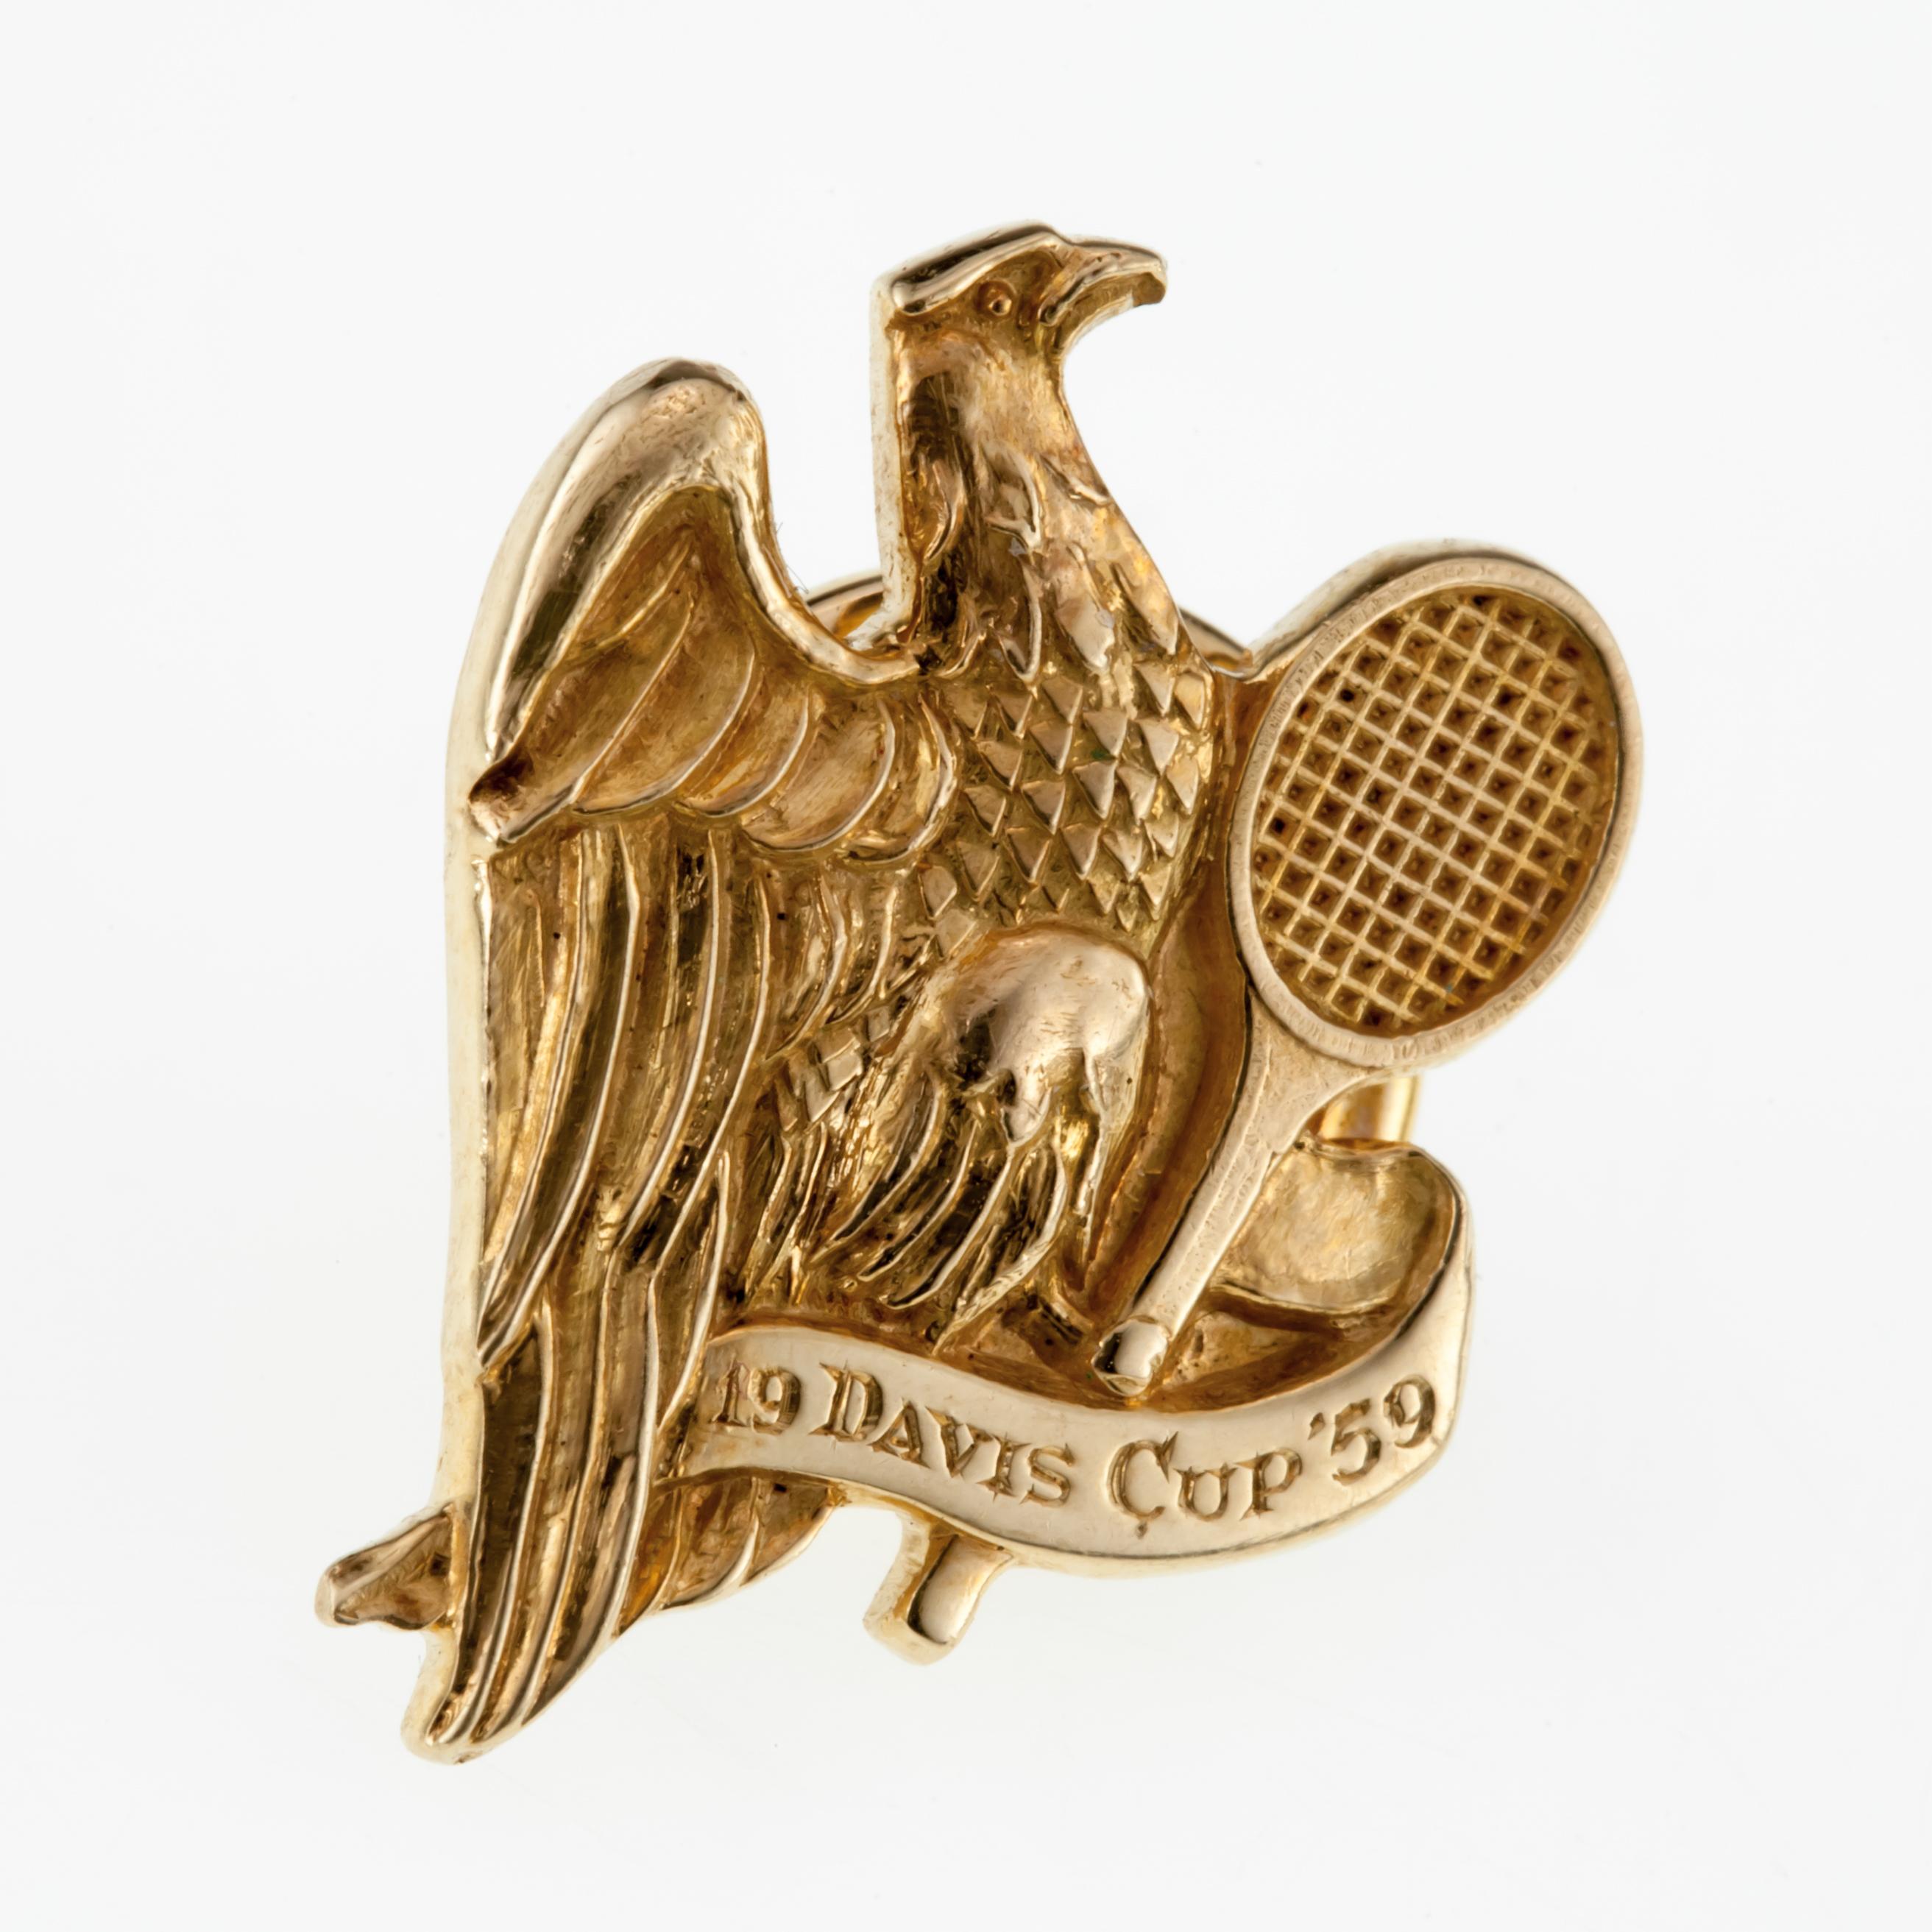 Gorgeous Tie Tack by Tiffany & Co.
Features an Eagle with a Tennis Racket
Banner Beneath Eagle Says 